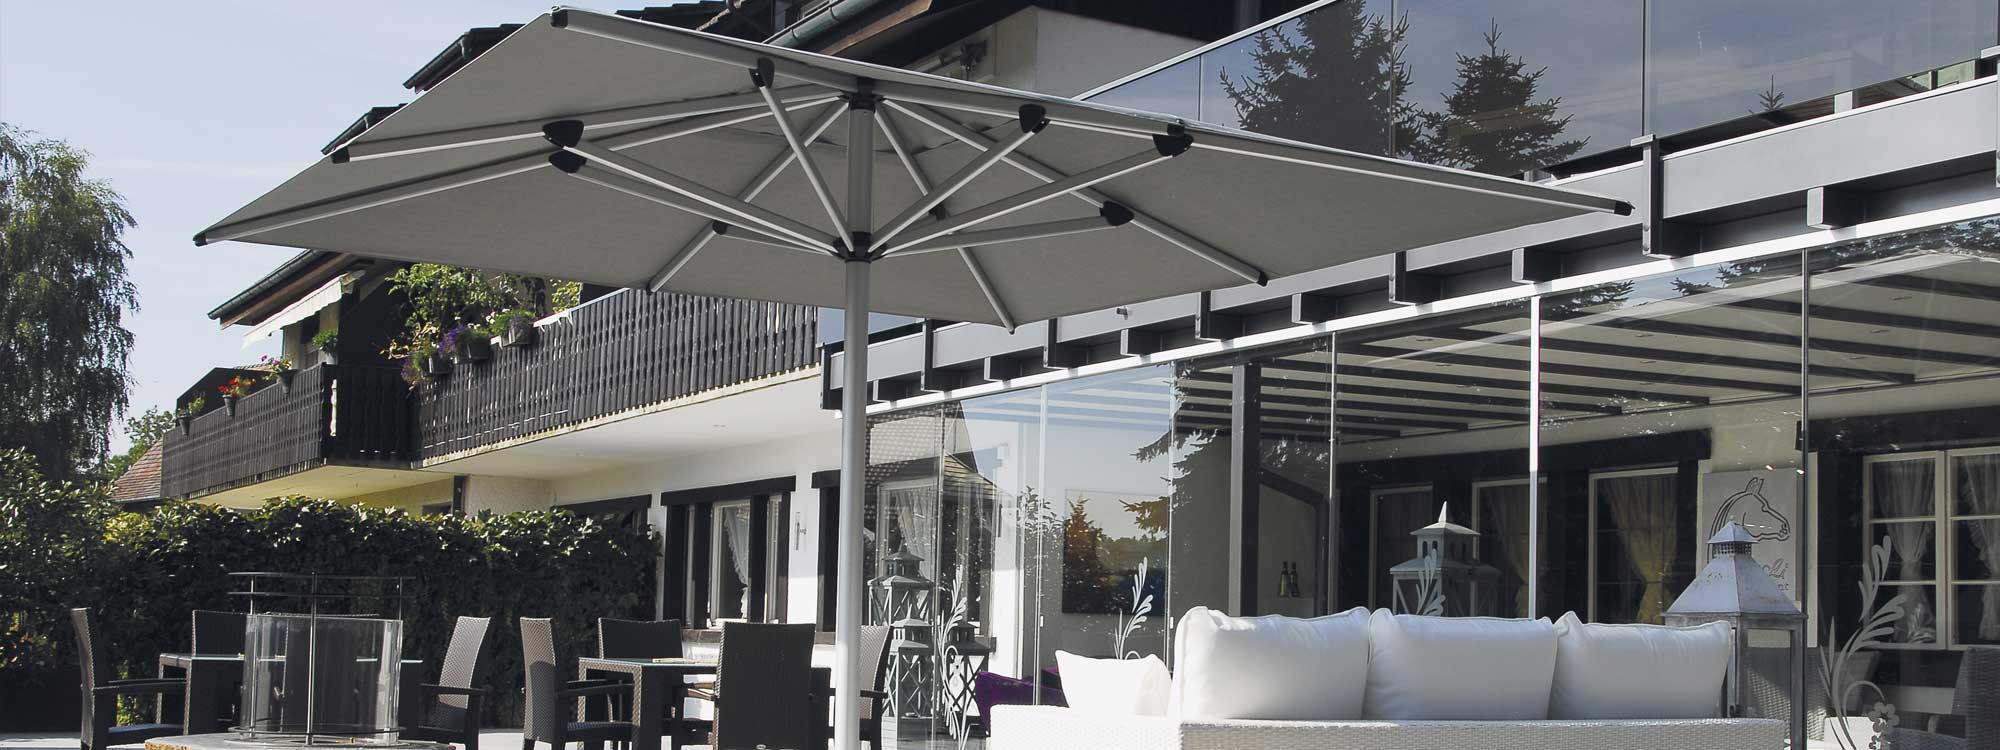 Image of Shademaker Astral large square mast parasol on terrace above lounge and dining furniture